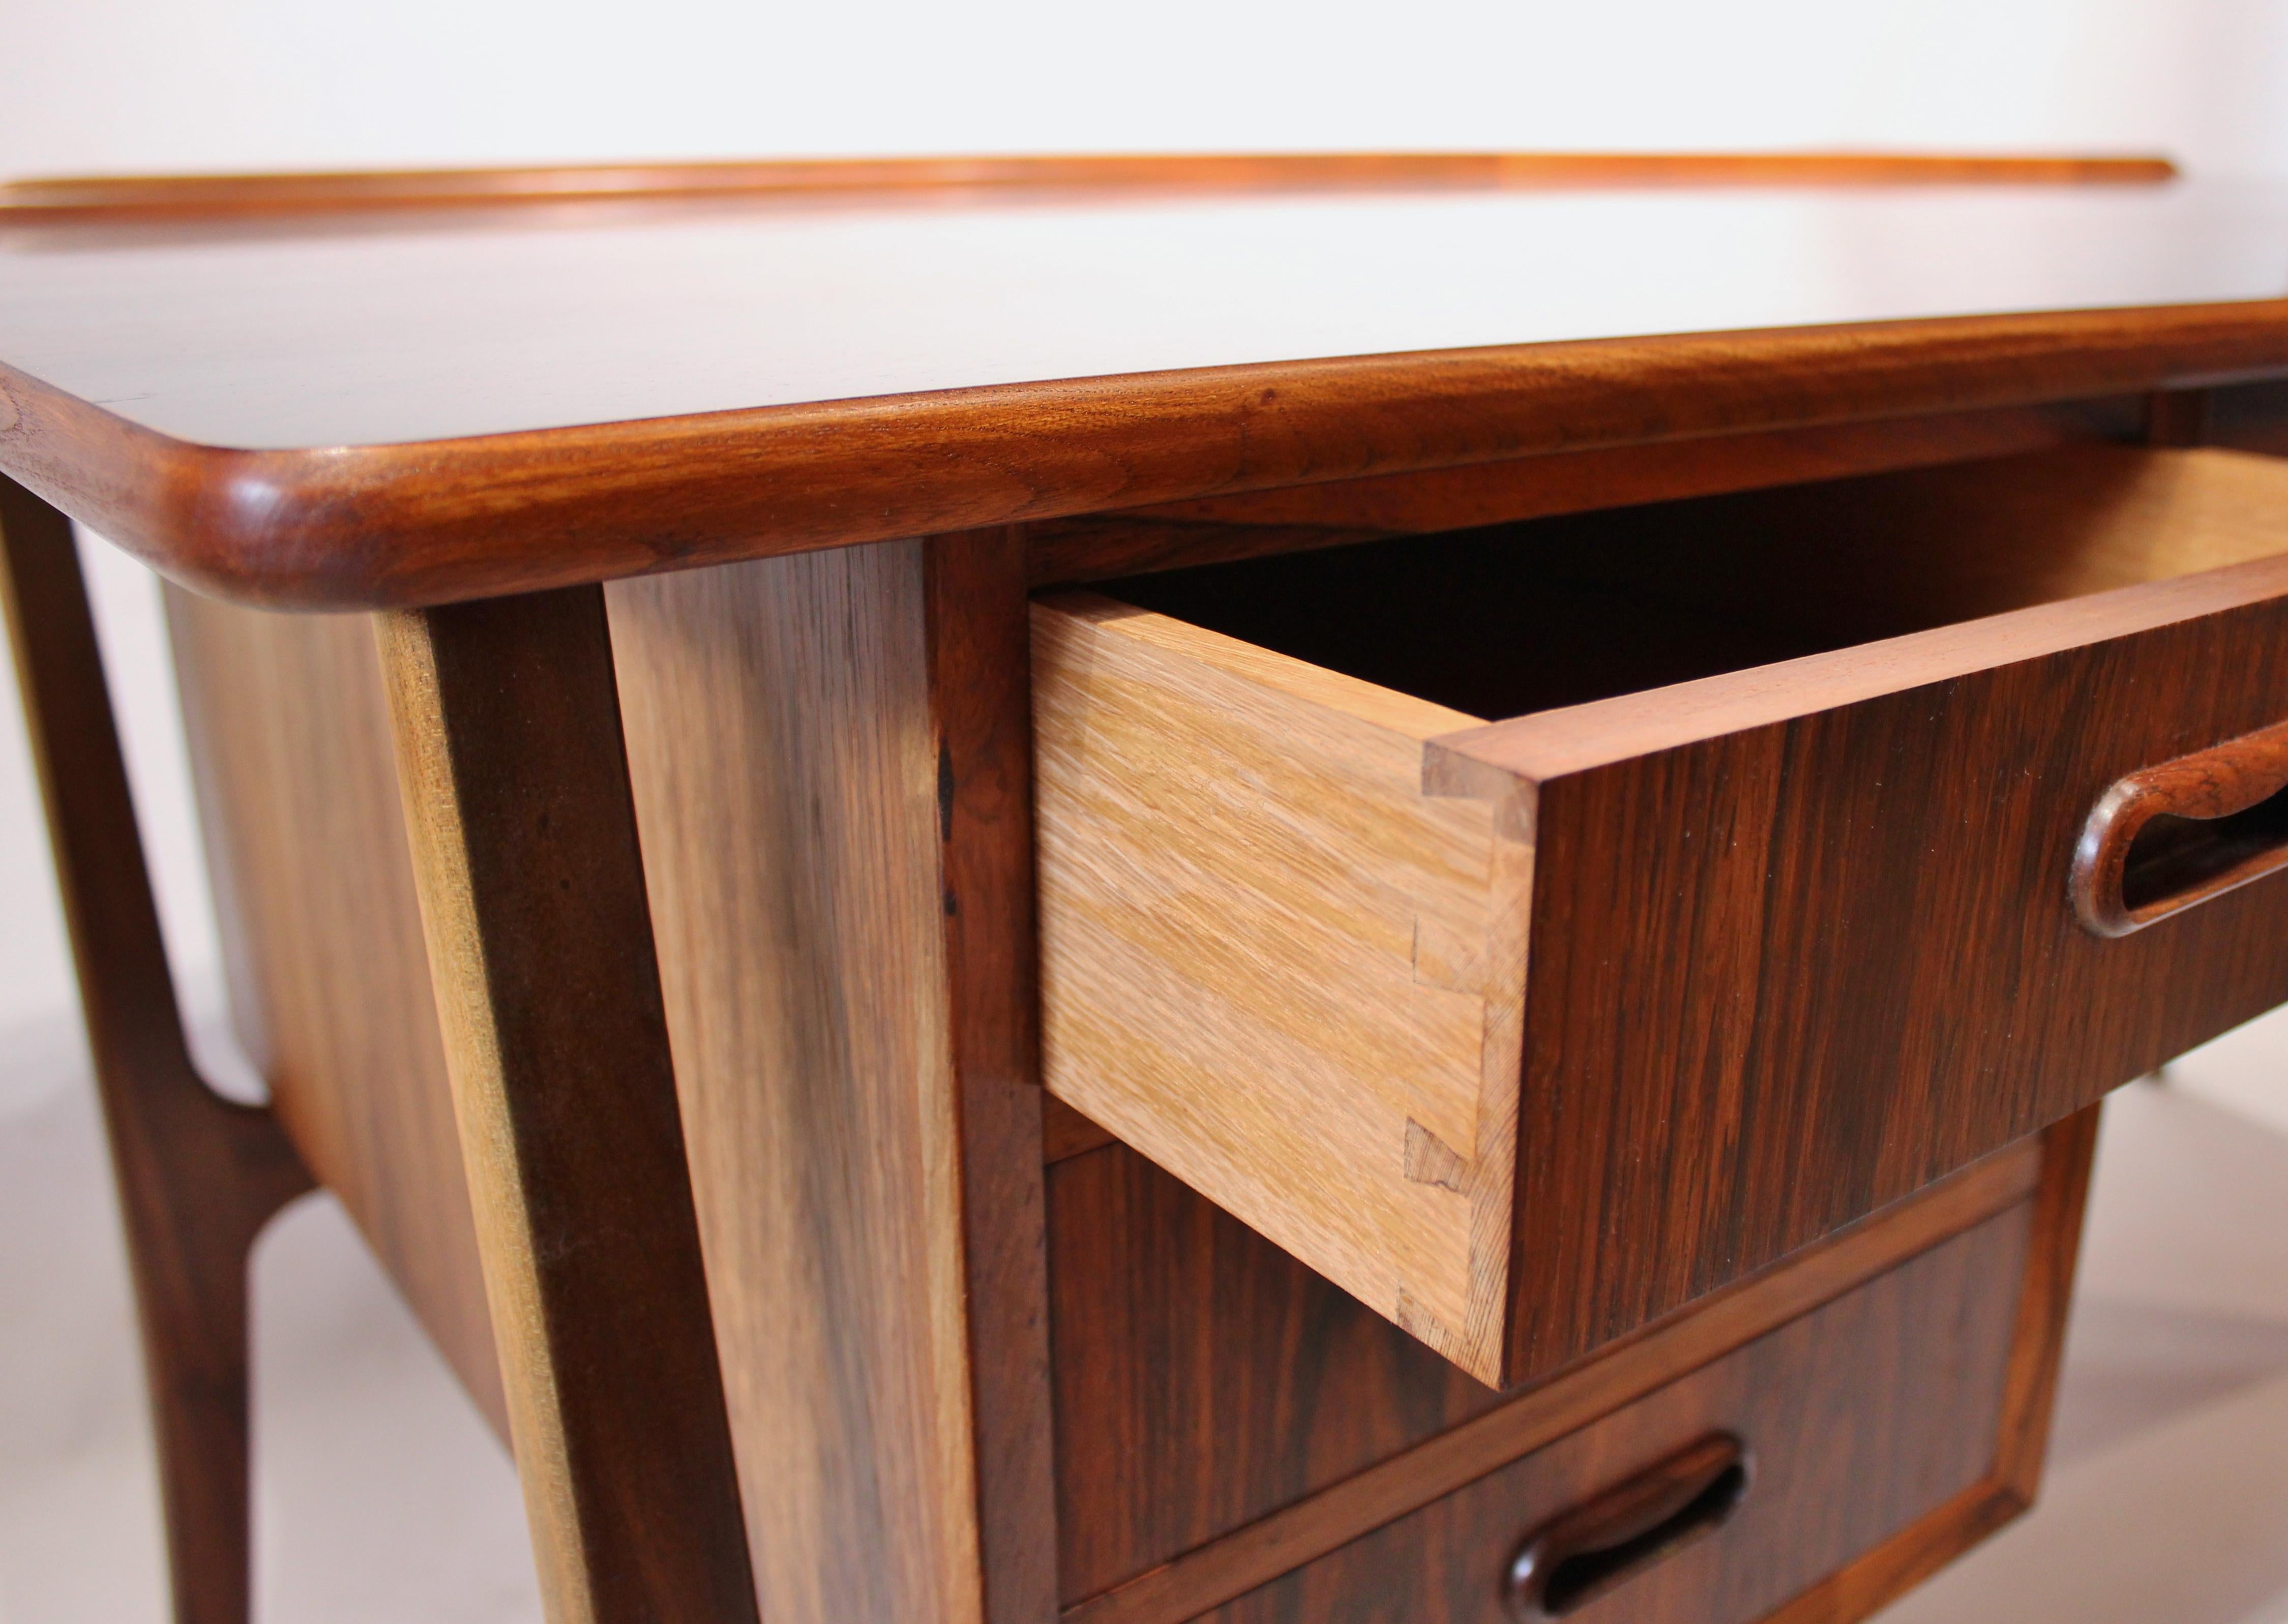 Danish Desk in Rosewood by Svend Aage Madsen from the 1960s